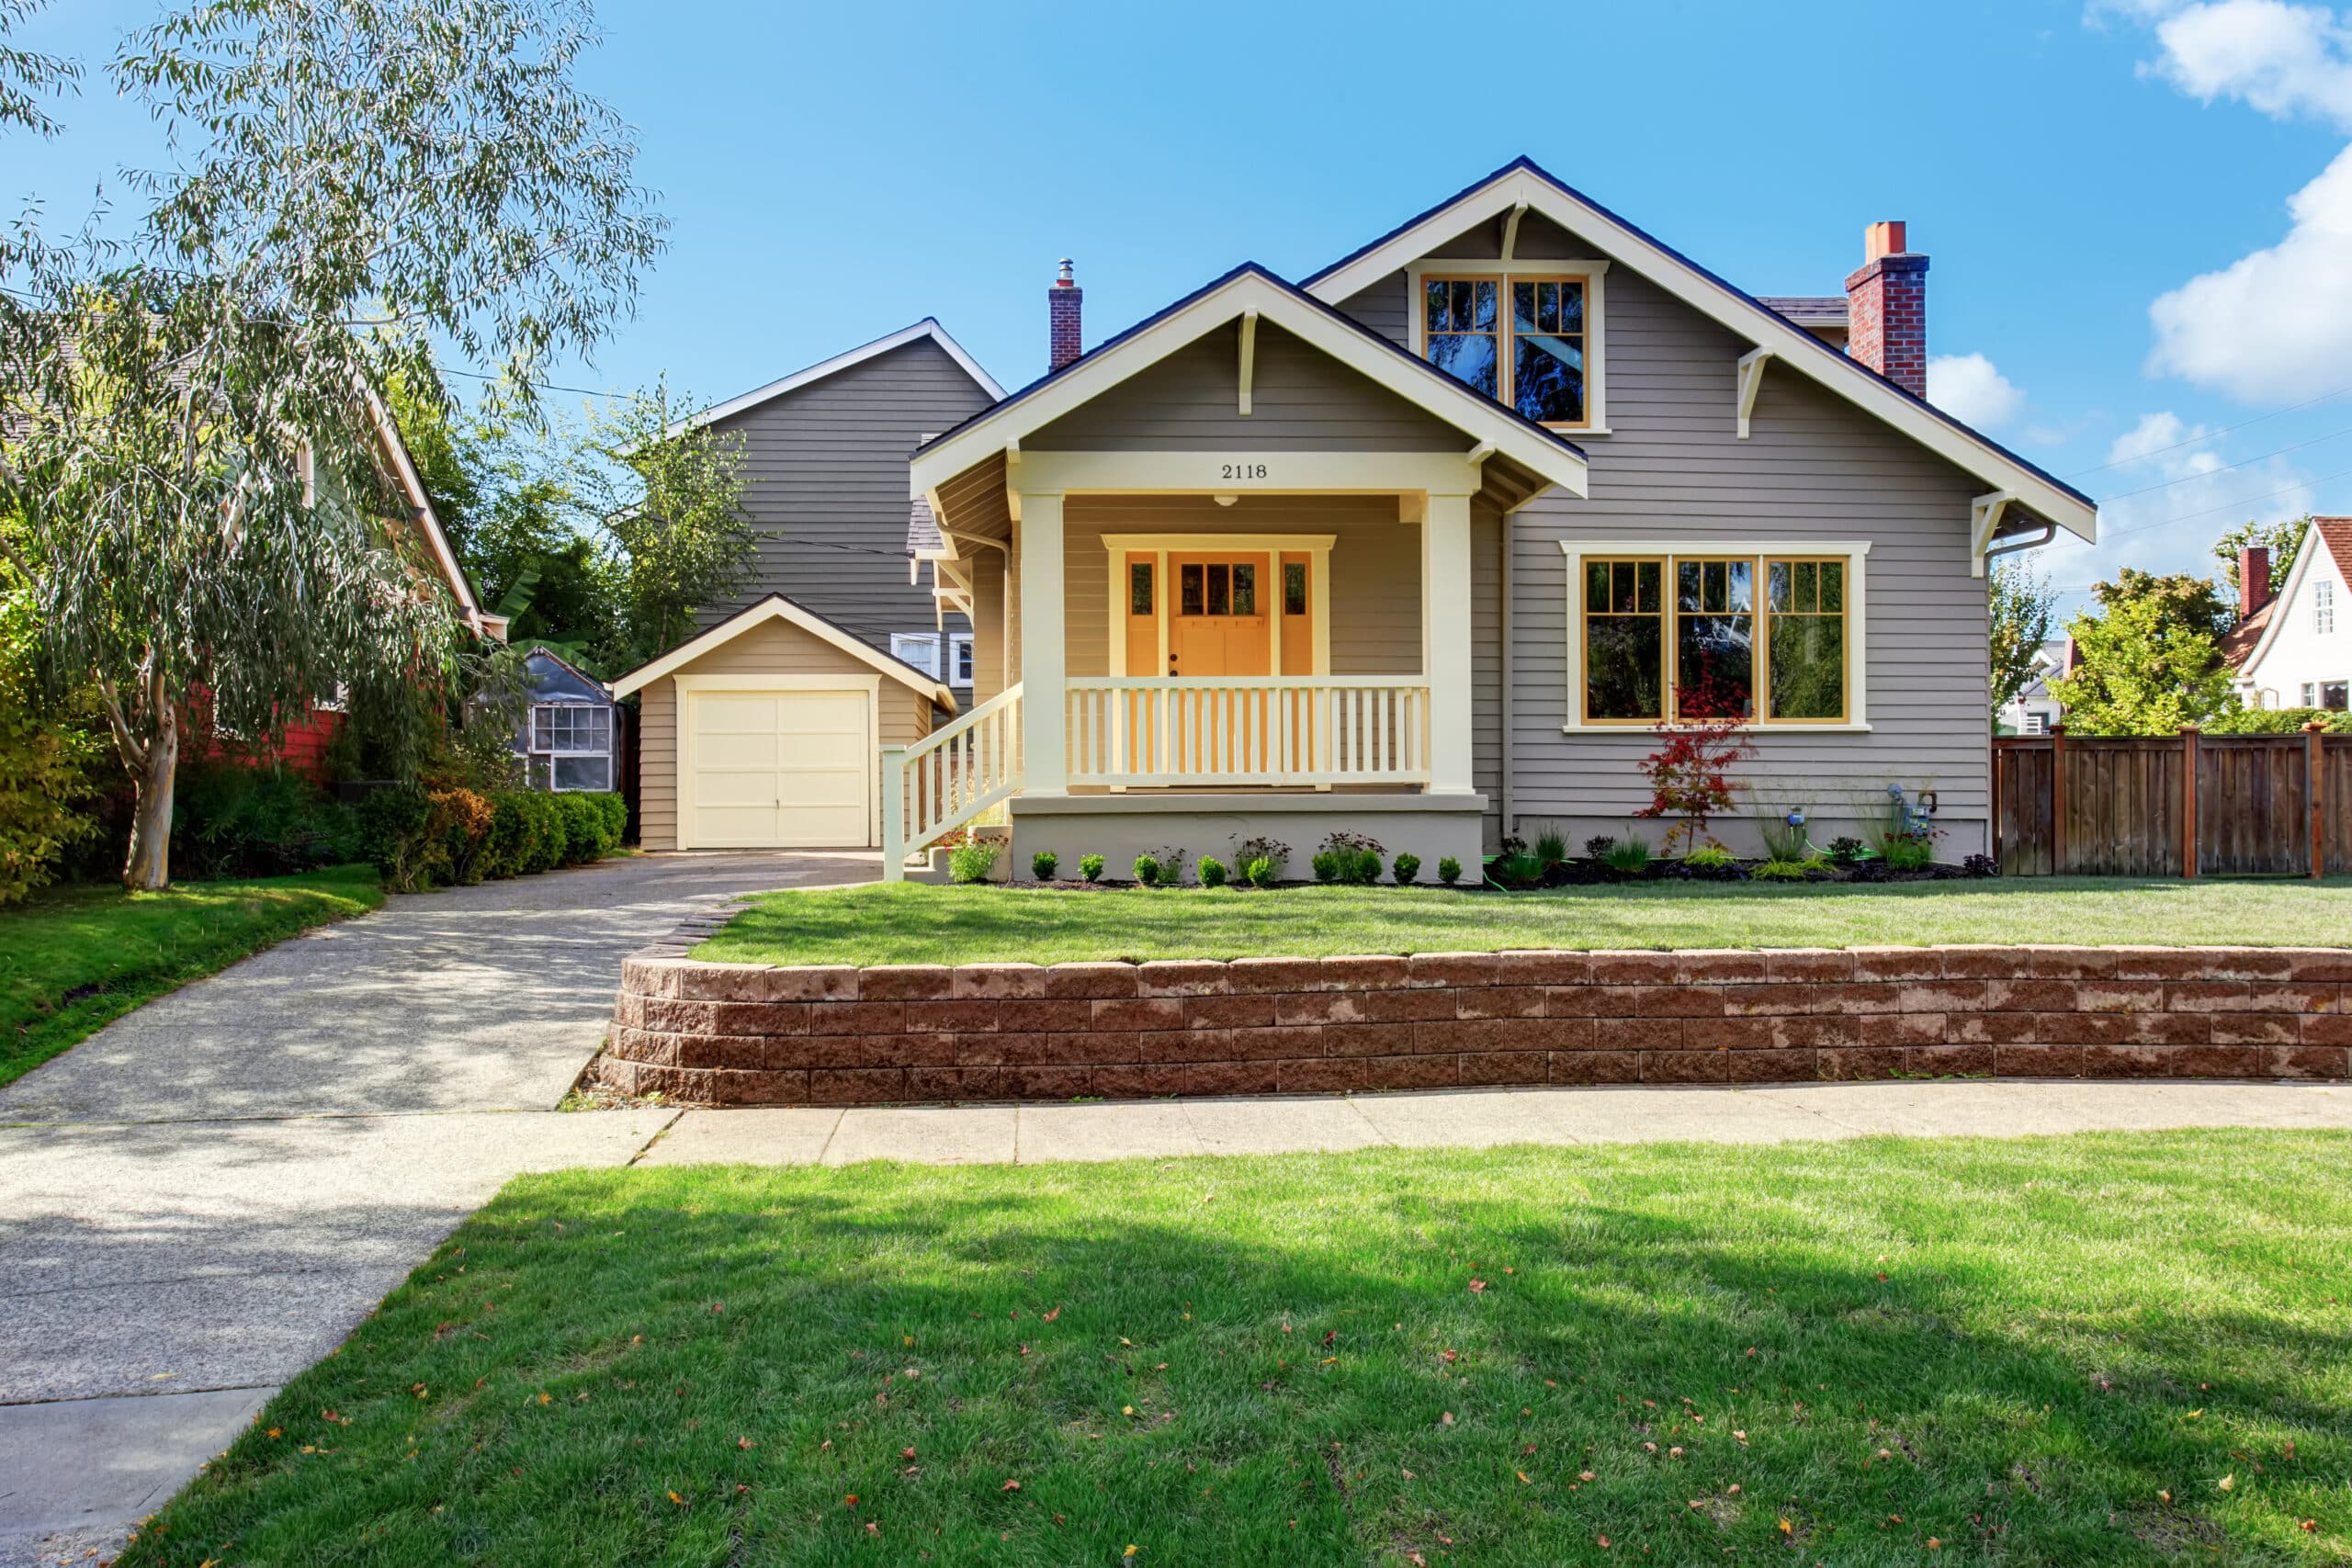 3 Great Reasons Why Building A Home In Utah Is Cheaper Than Buying